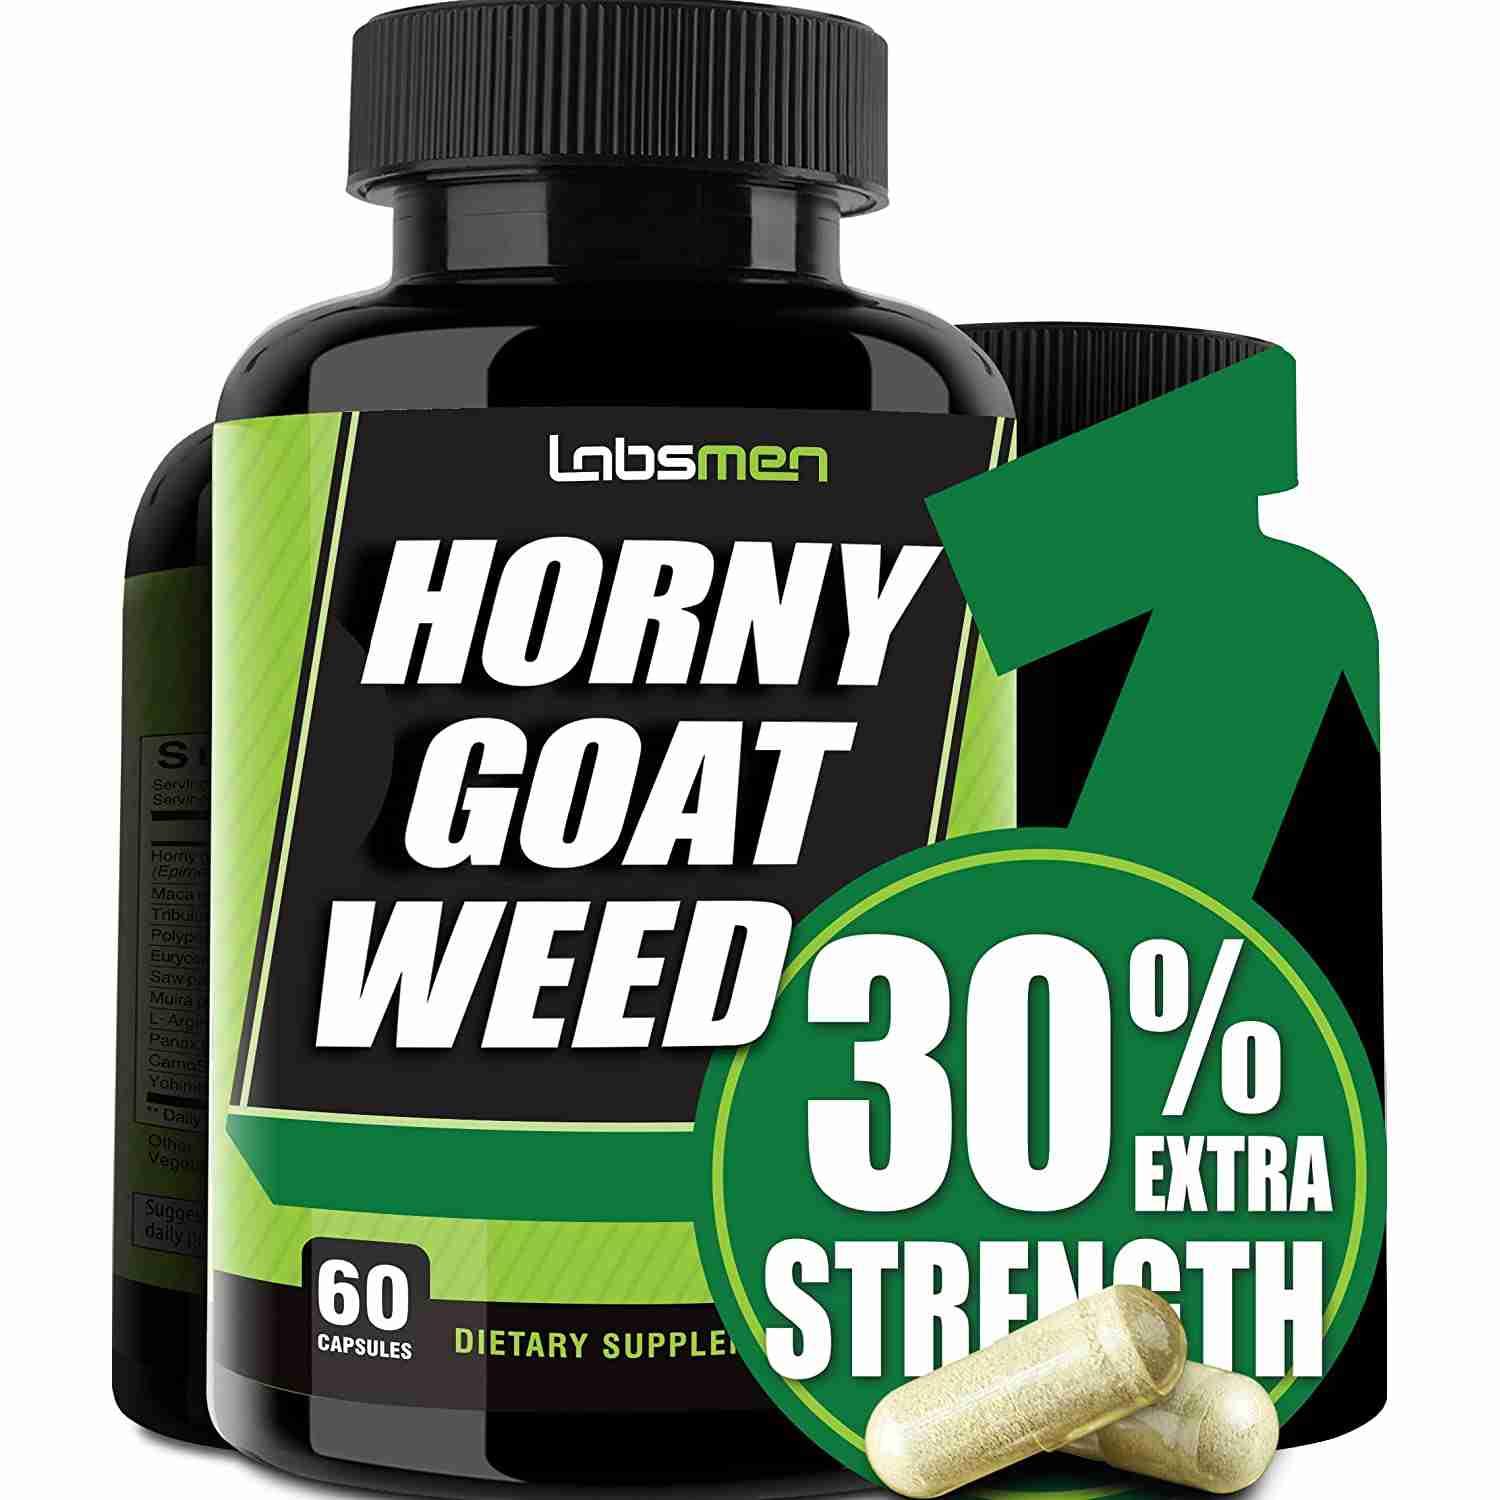 horny-goat-weed with cash back rebate